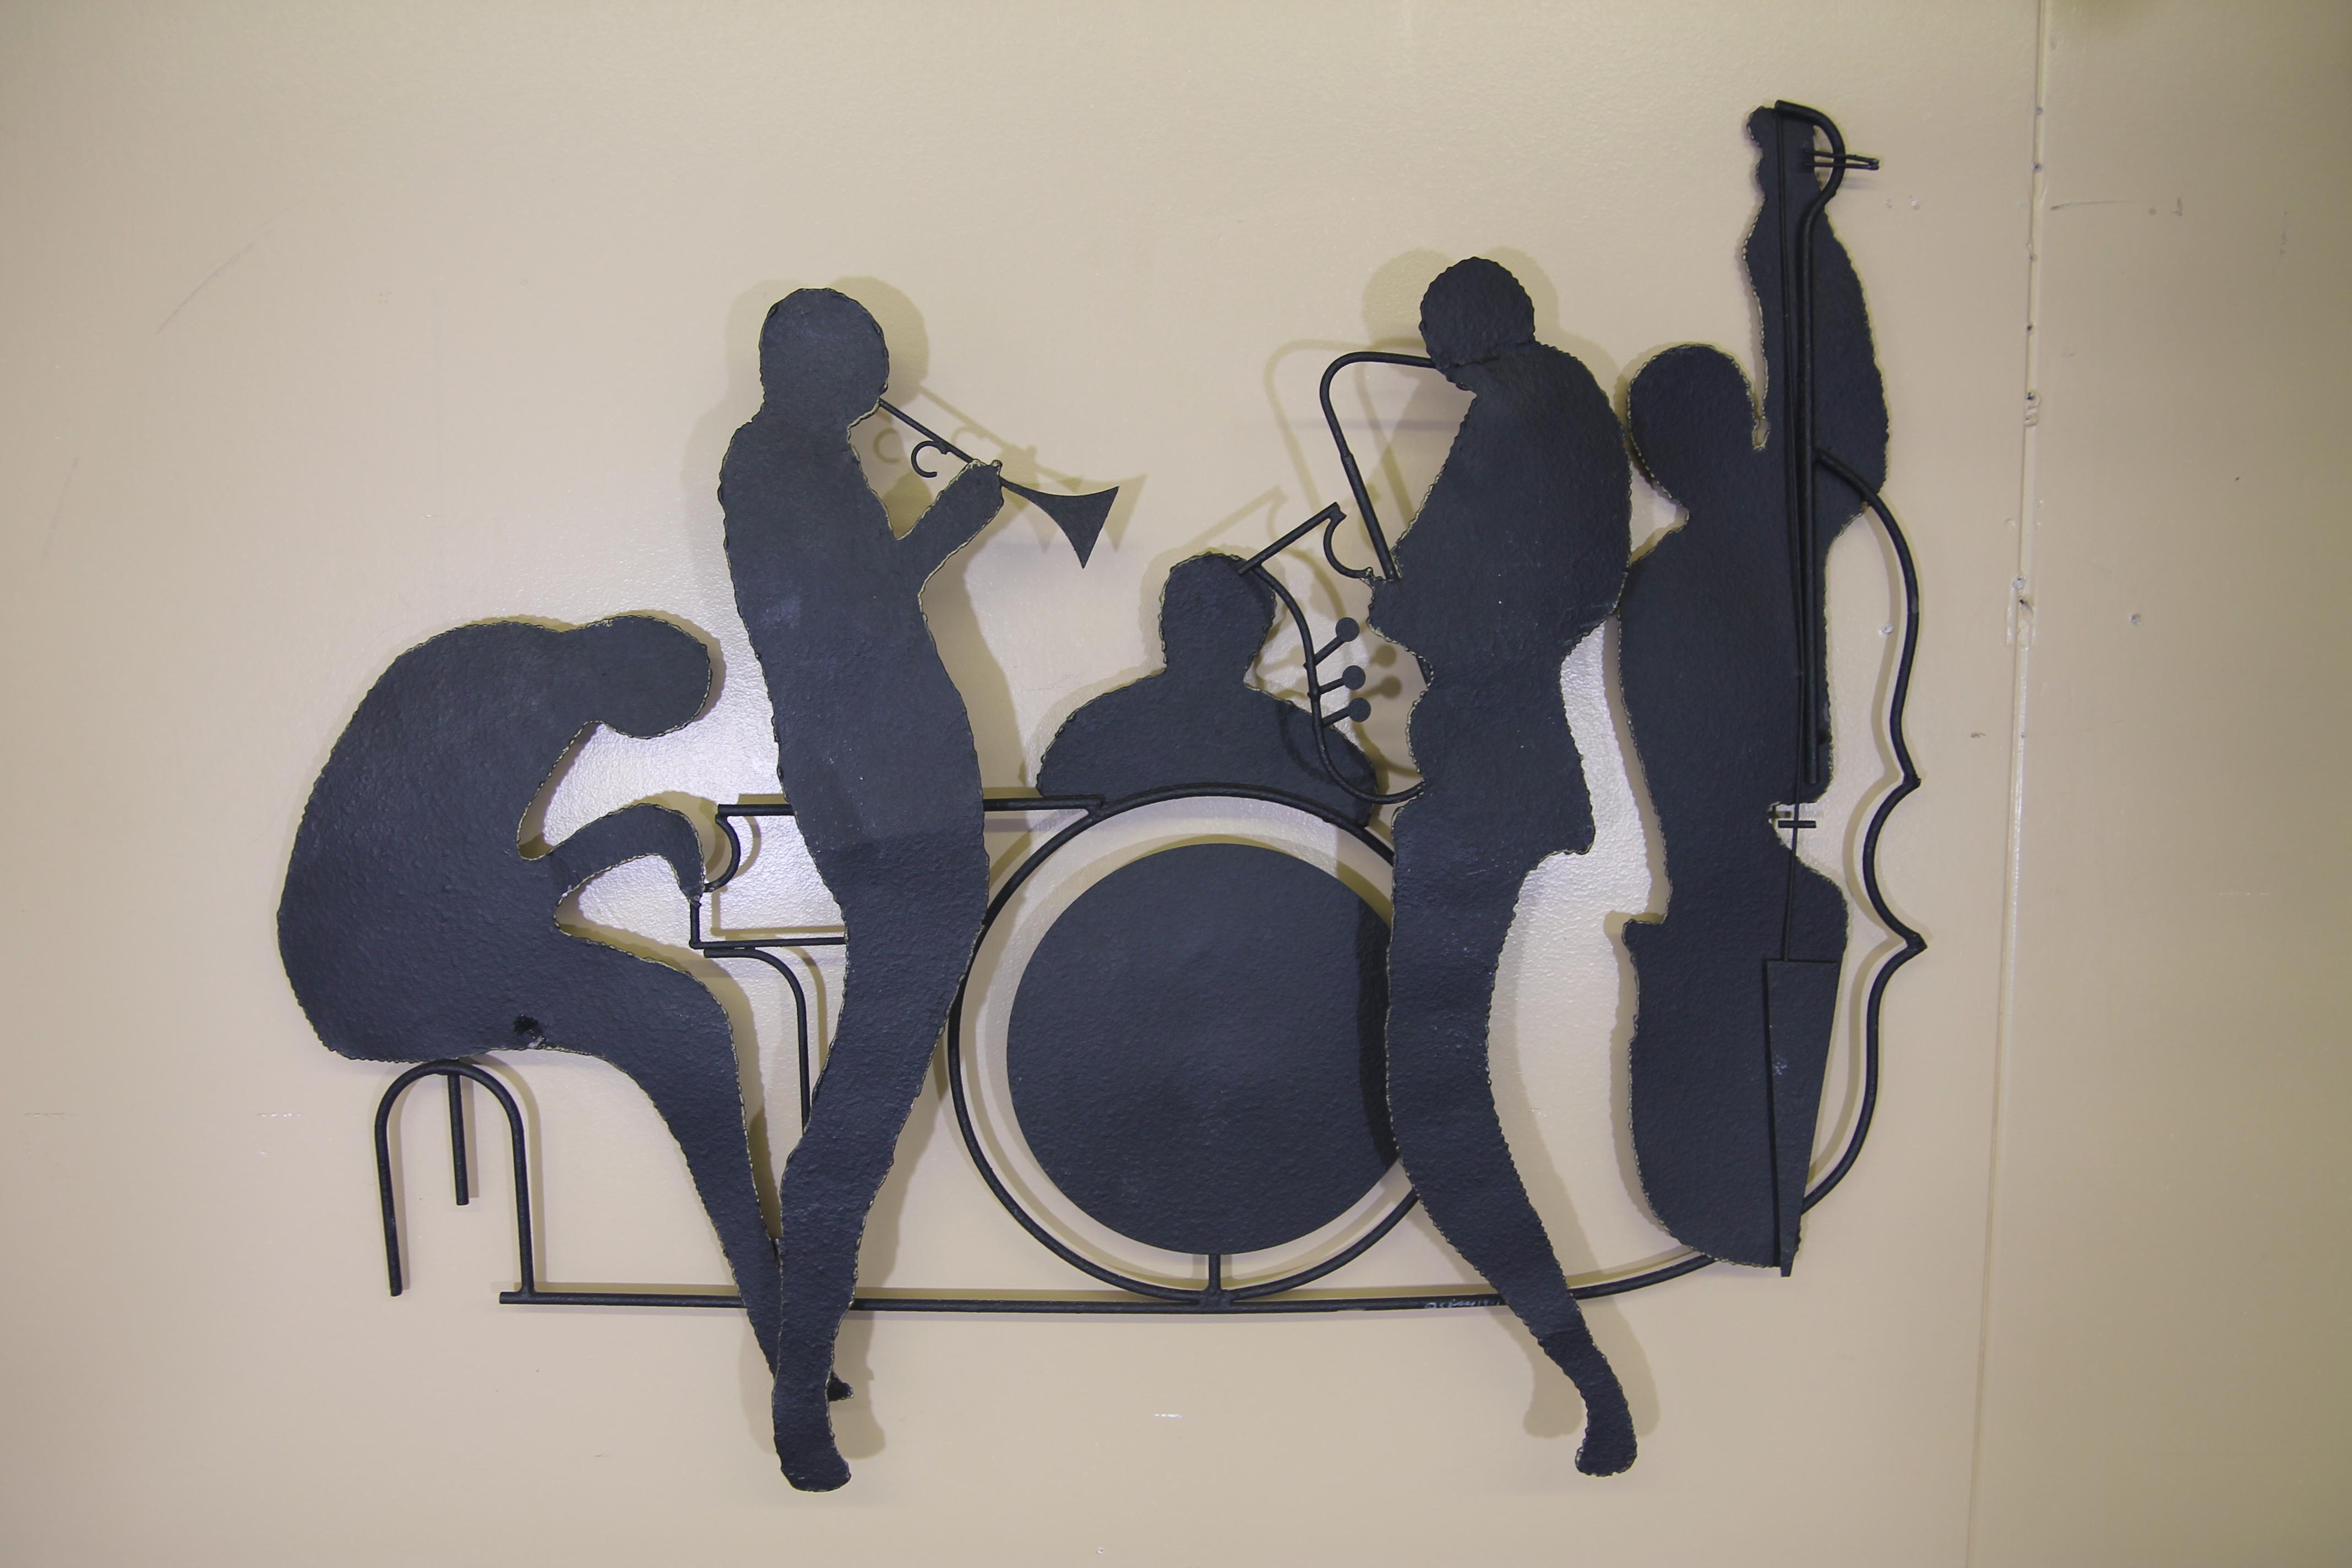 Curtis Jere 5-piece jazz band wall hanging. Very nice simple wall art that’s in good vintage condition. Will look great in your music room at home. Piece is dated and signed 1991.